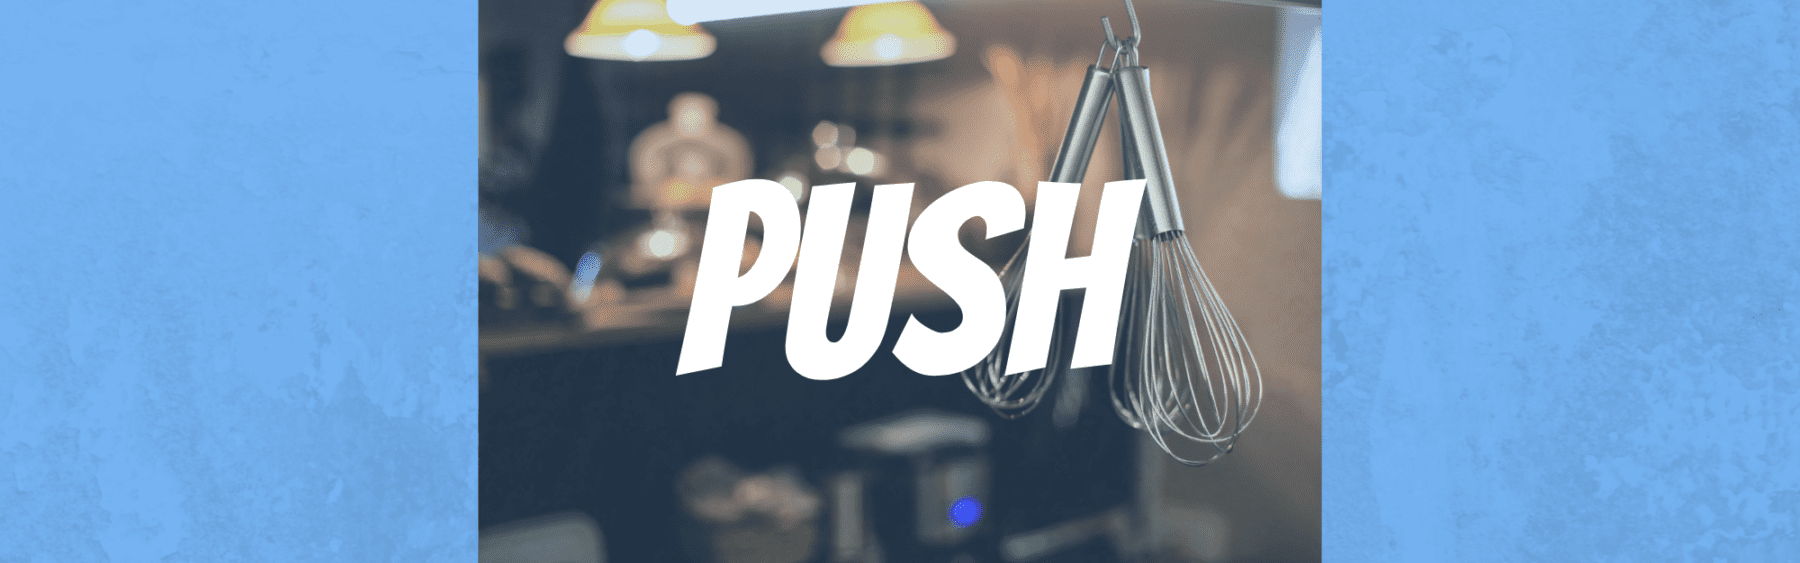 the word push over a kitchen background